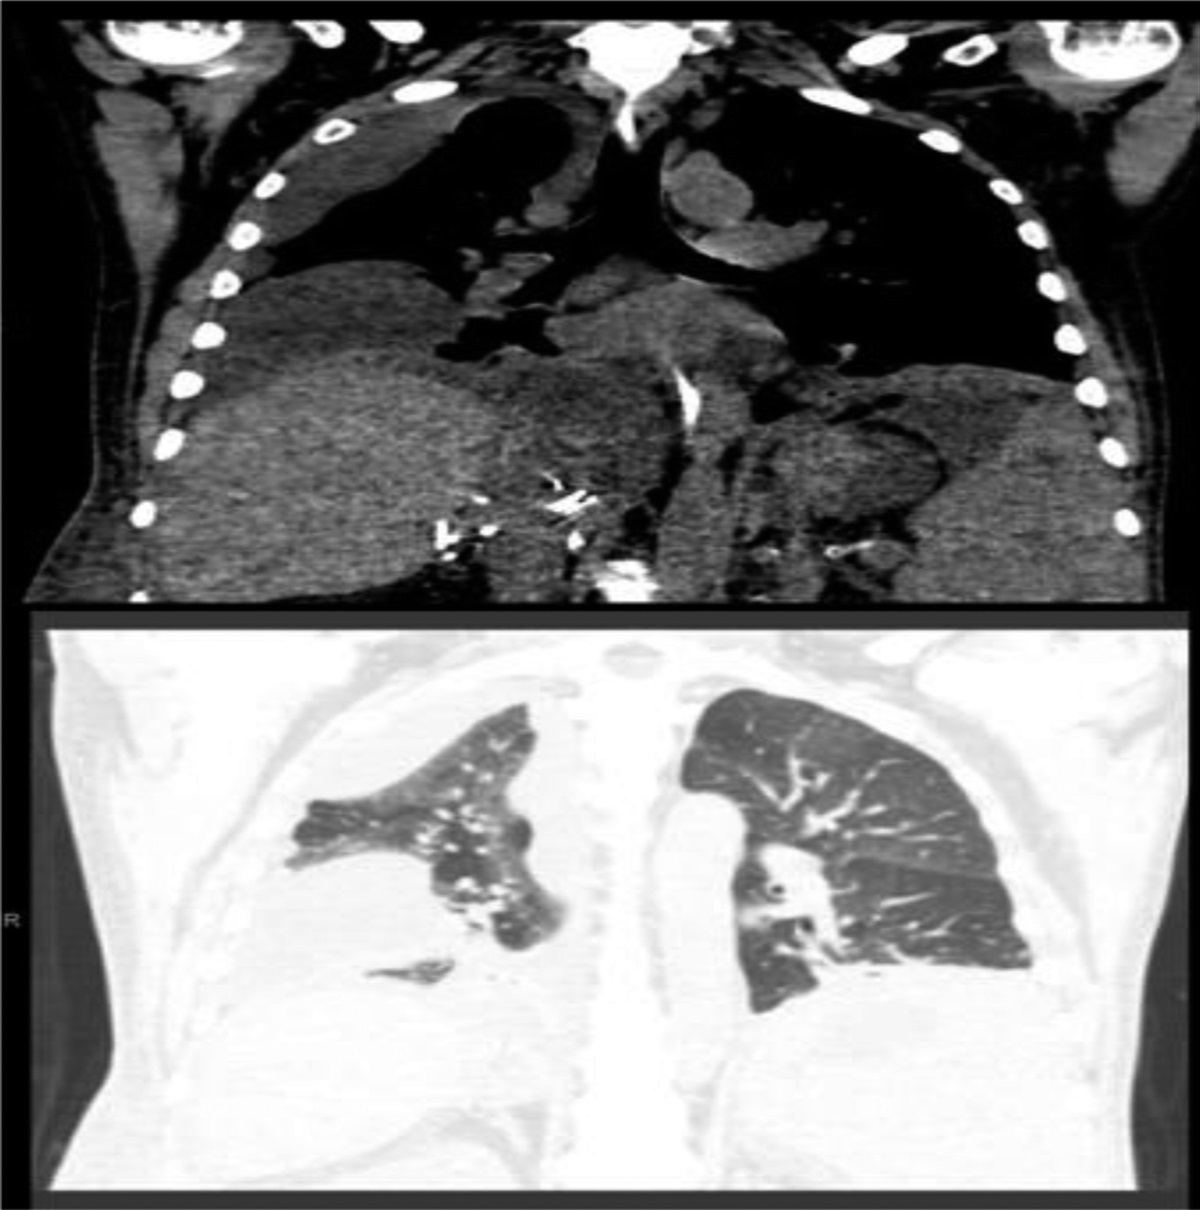 Cryptococcal Infection Presenting as a Pleural Effusion in a Liver Transplant Recipient